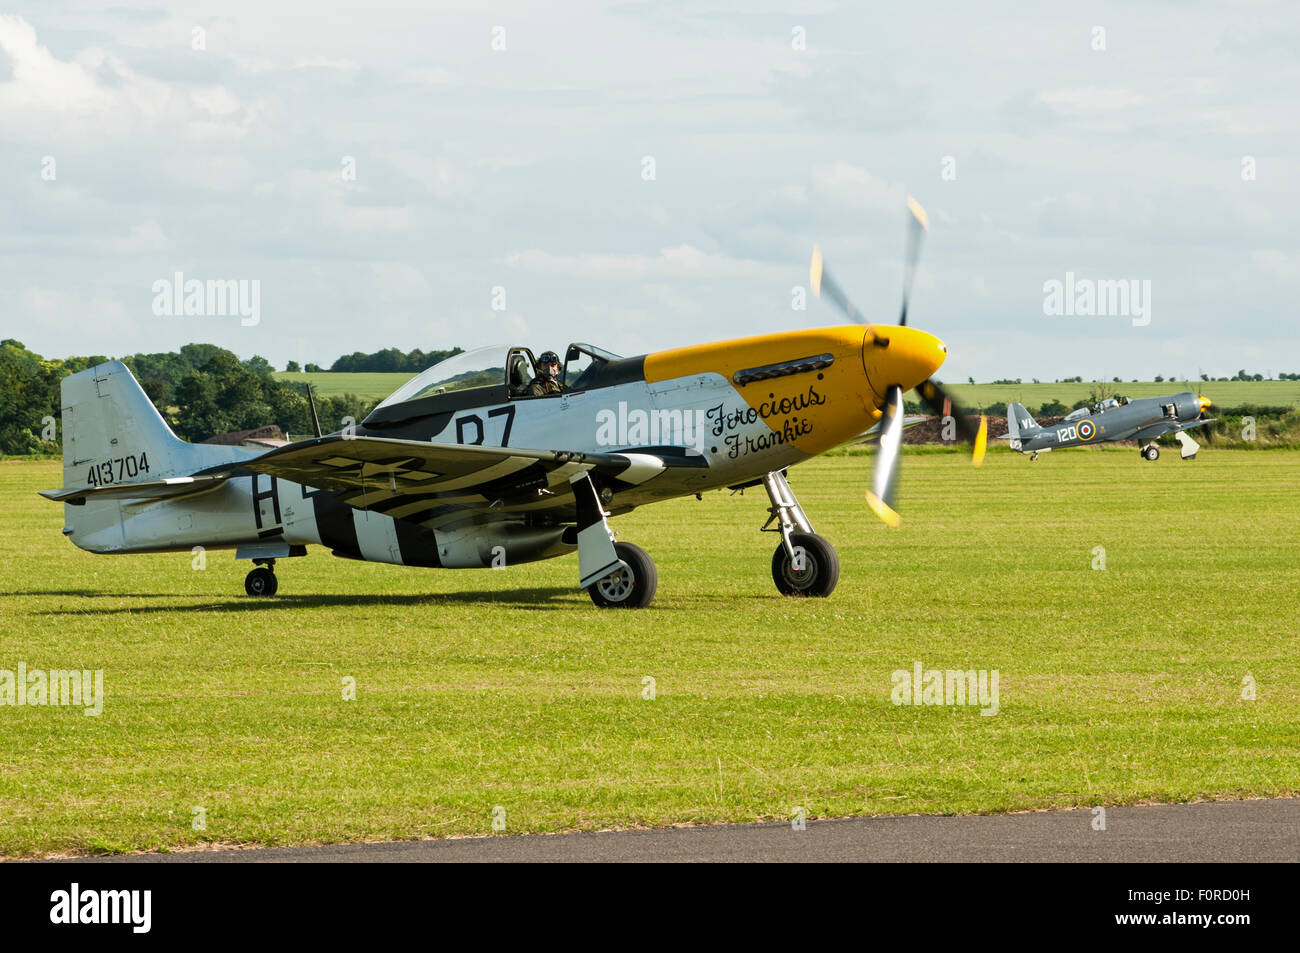 Side view of a Mustang aircraft on an airfield with engine running. Another World War two aircraft is visible in background. Stock Photo